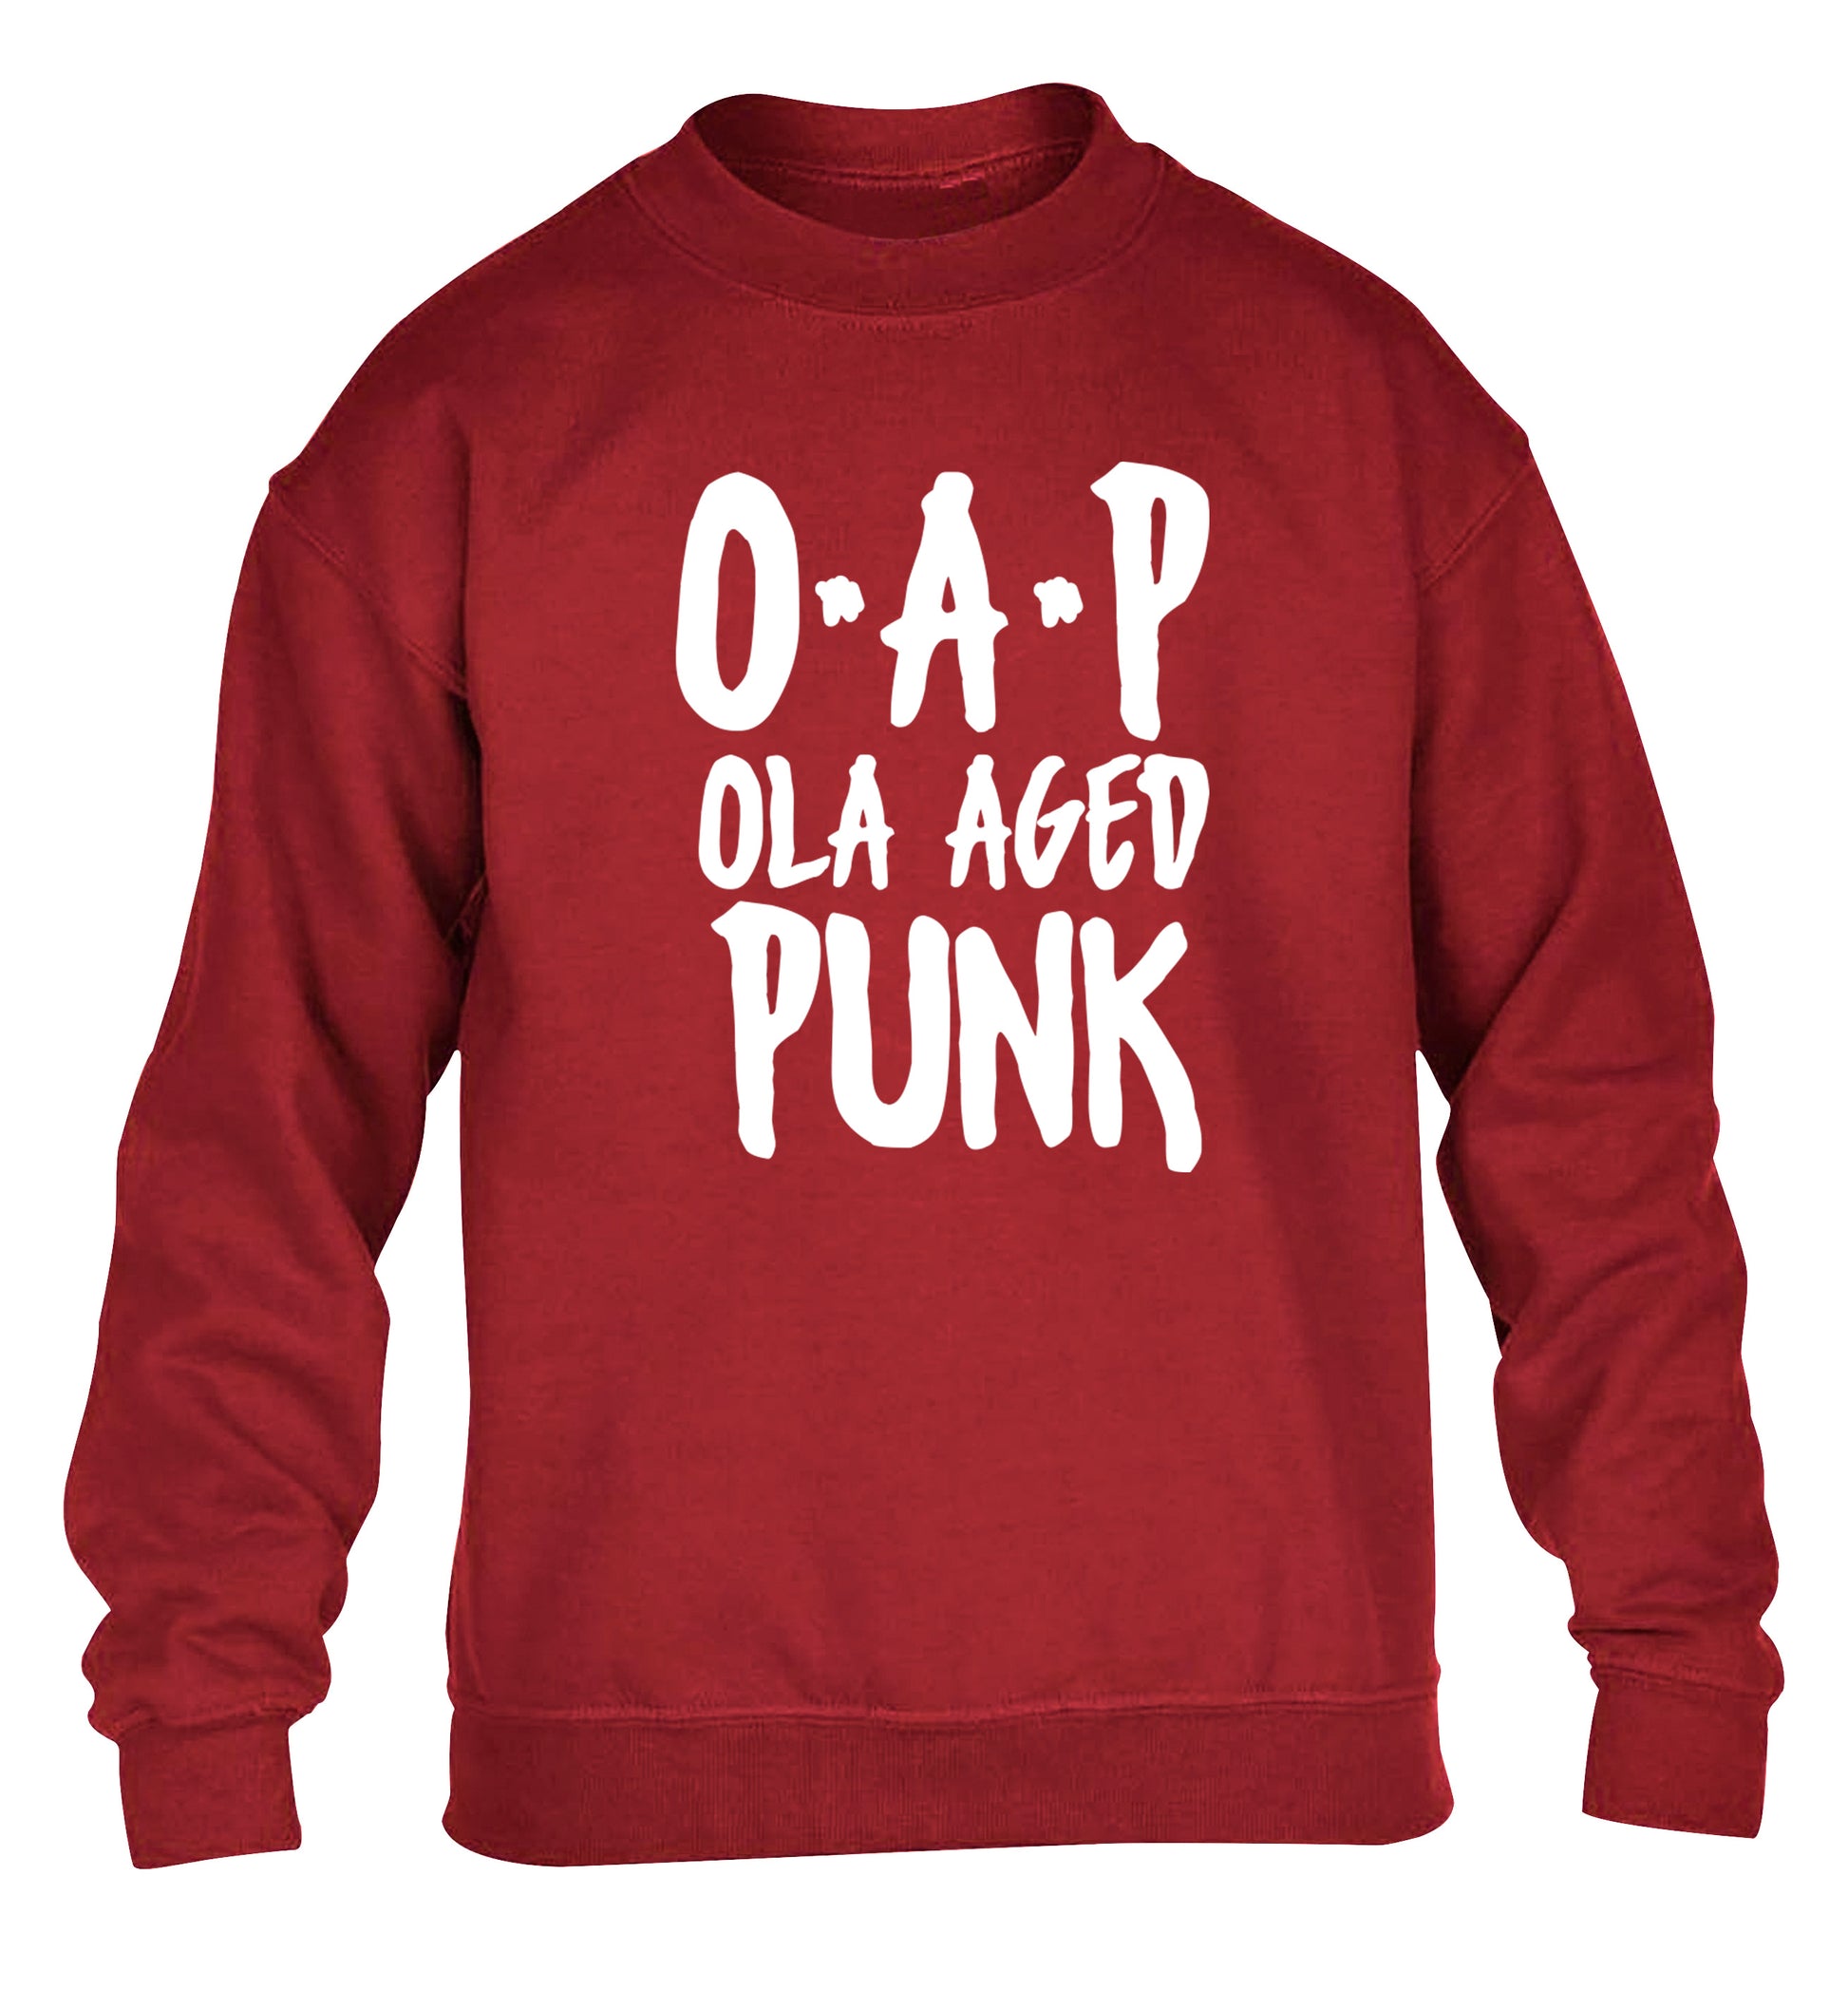 O.A.P Old Aged Punk children's grey sweater 12-13 Years